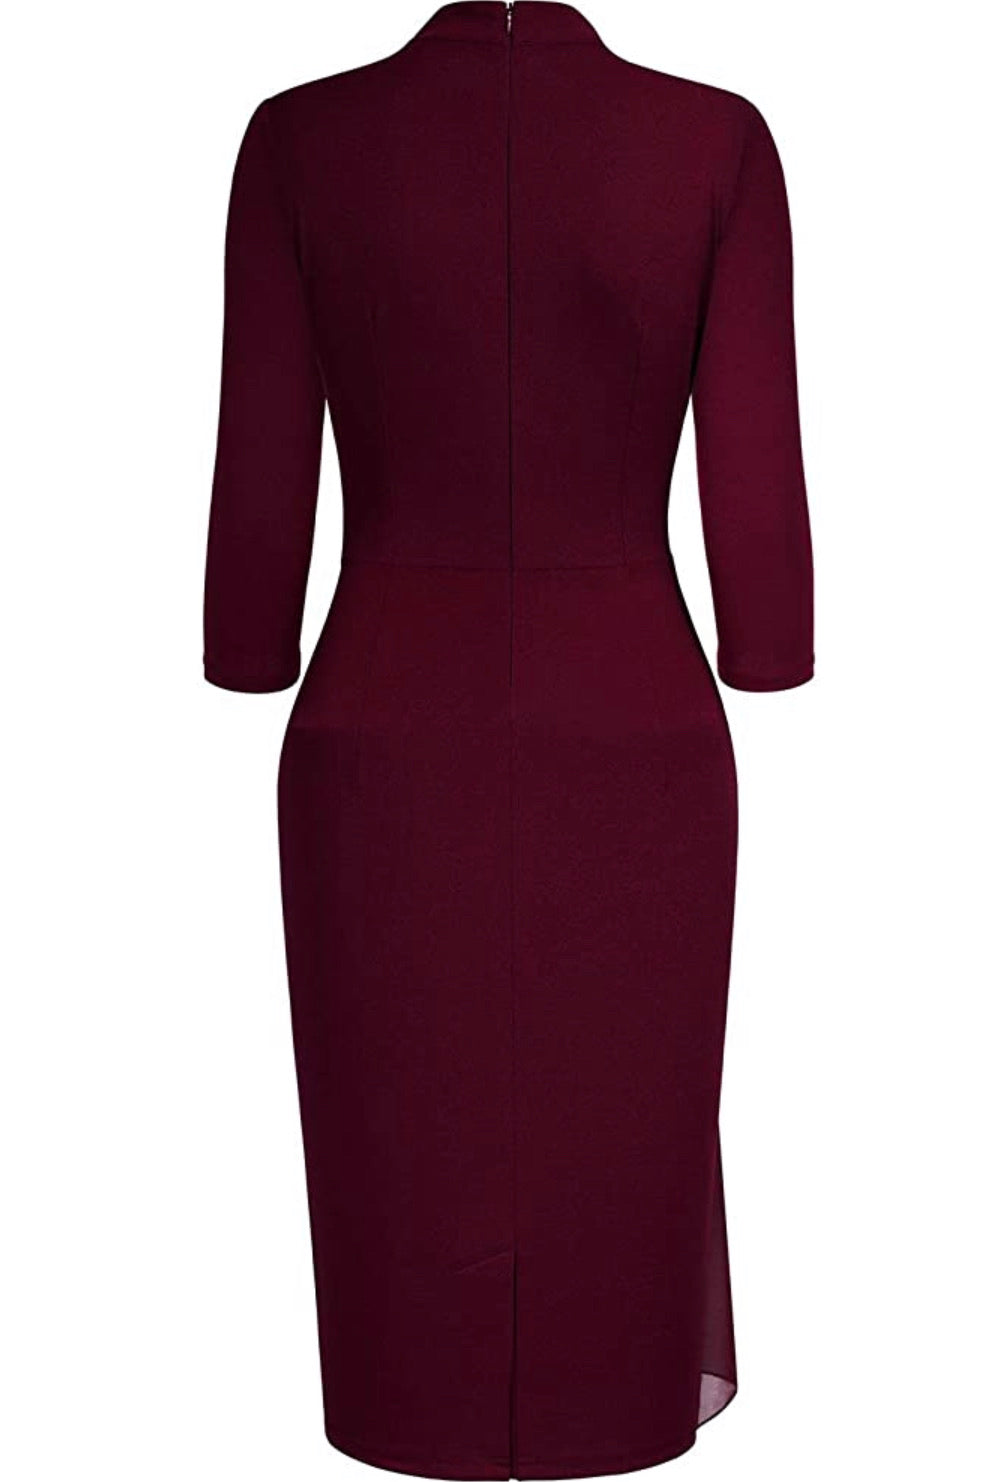 Vintage Inspired Pencil Dress, Sizes Small - 2XLarge (Burgundy)